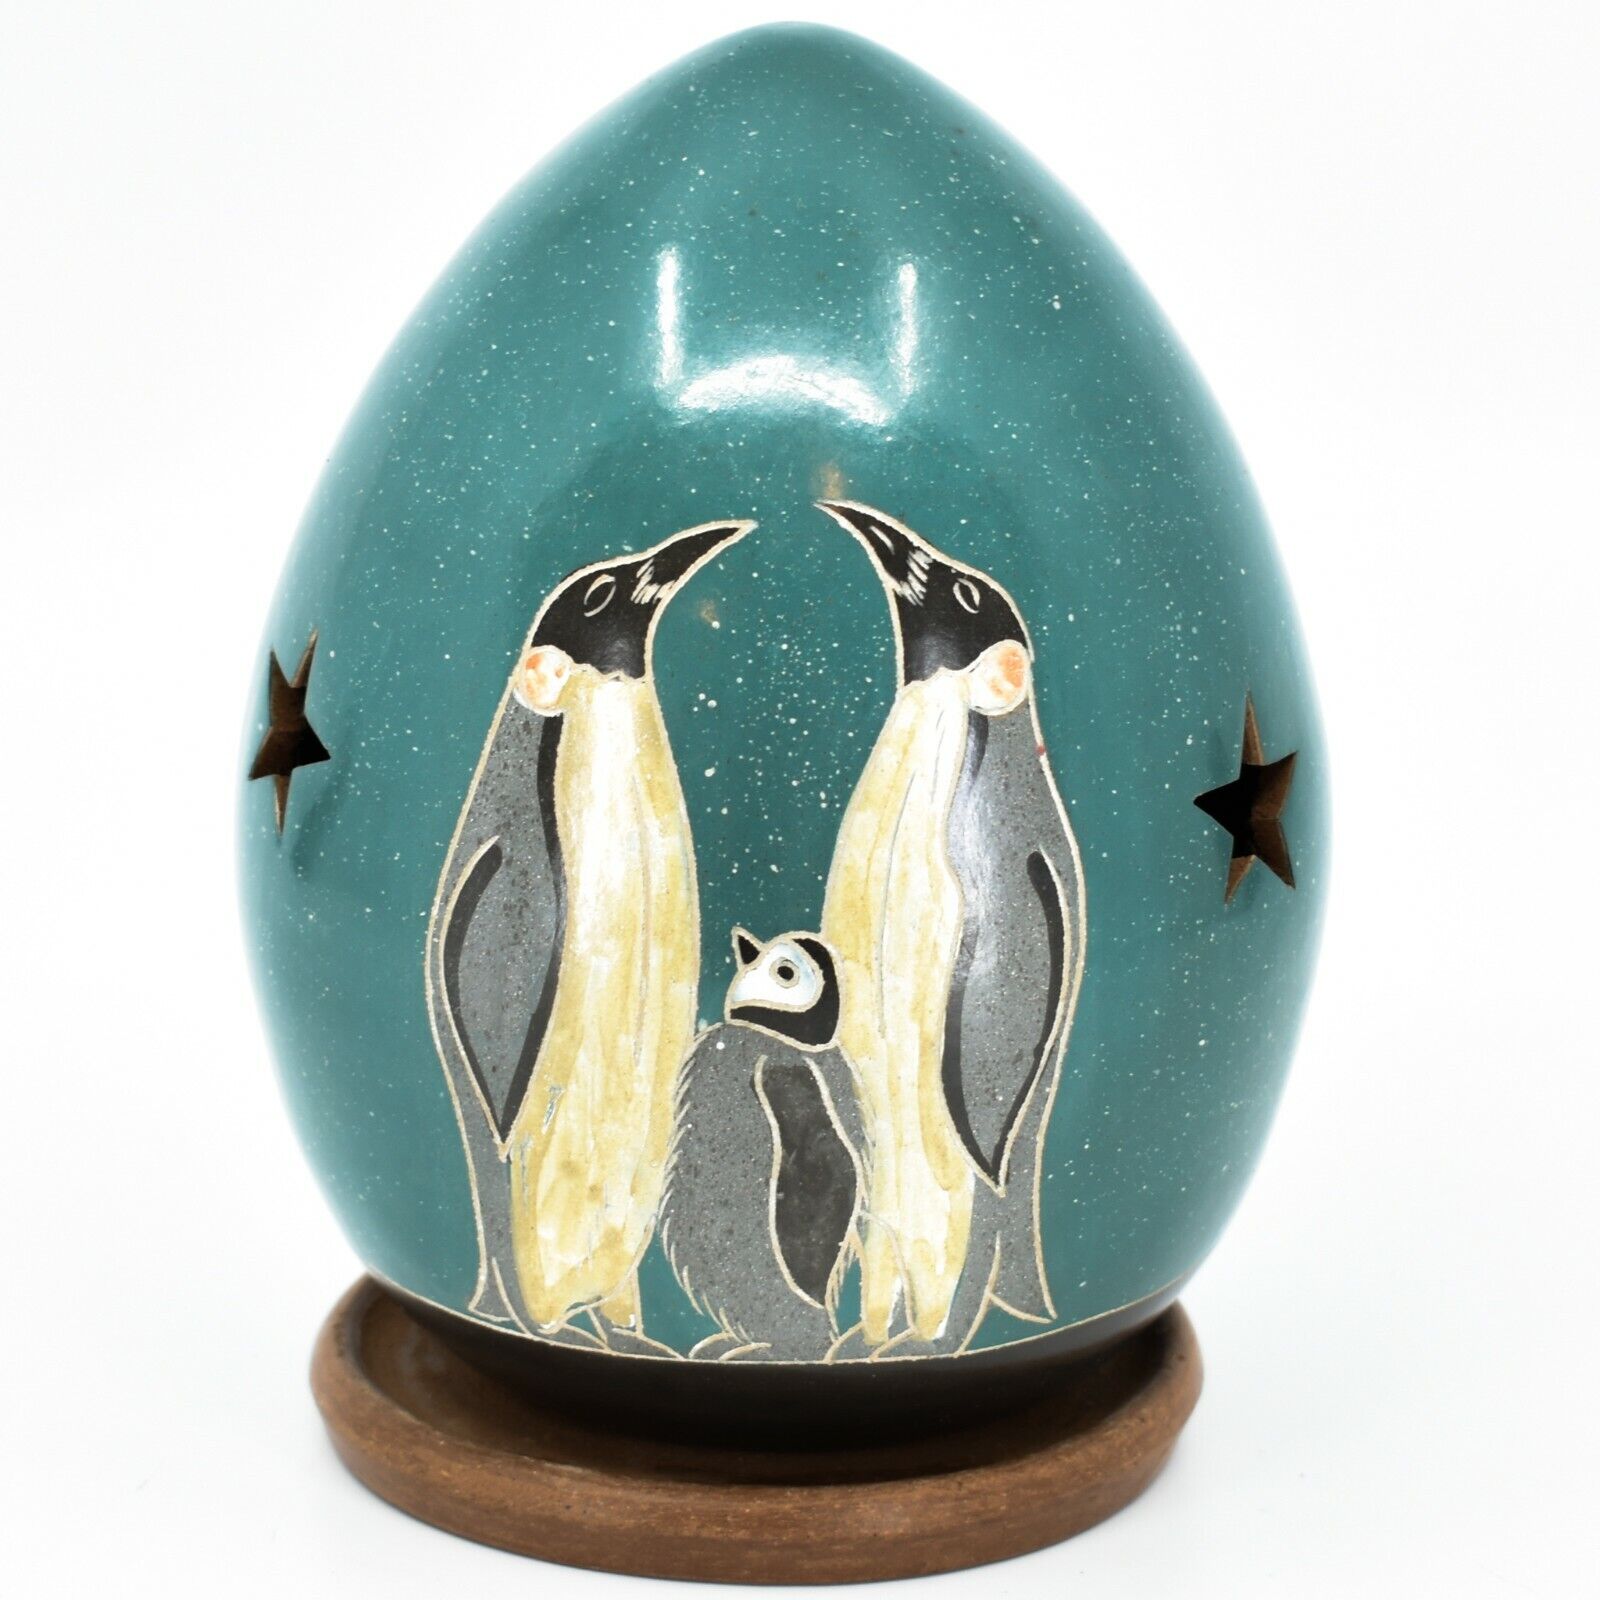 Hand Crafted Clay Pottery Emperor Penguins Star Luminary Tea Light Candle Holder